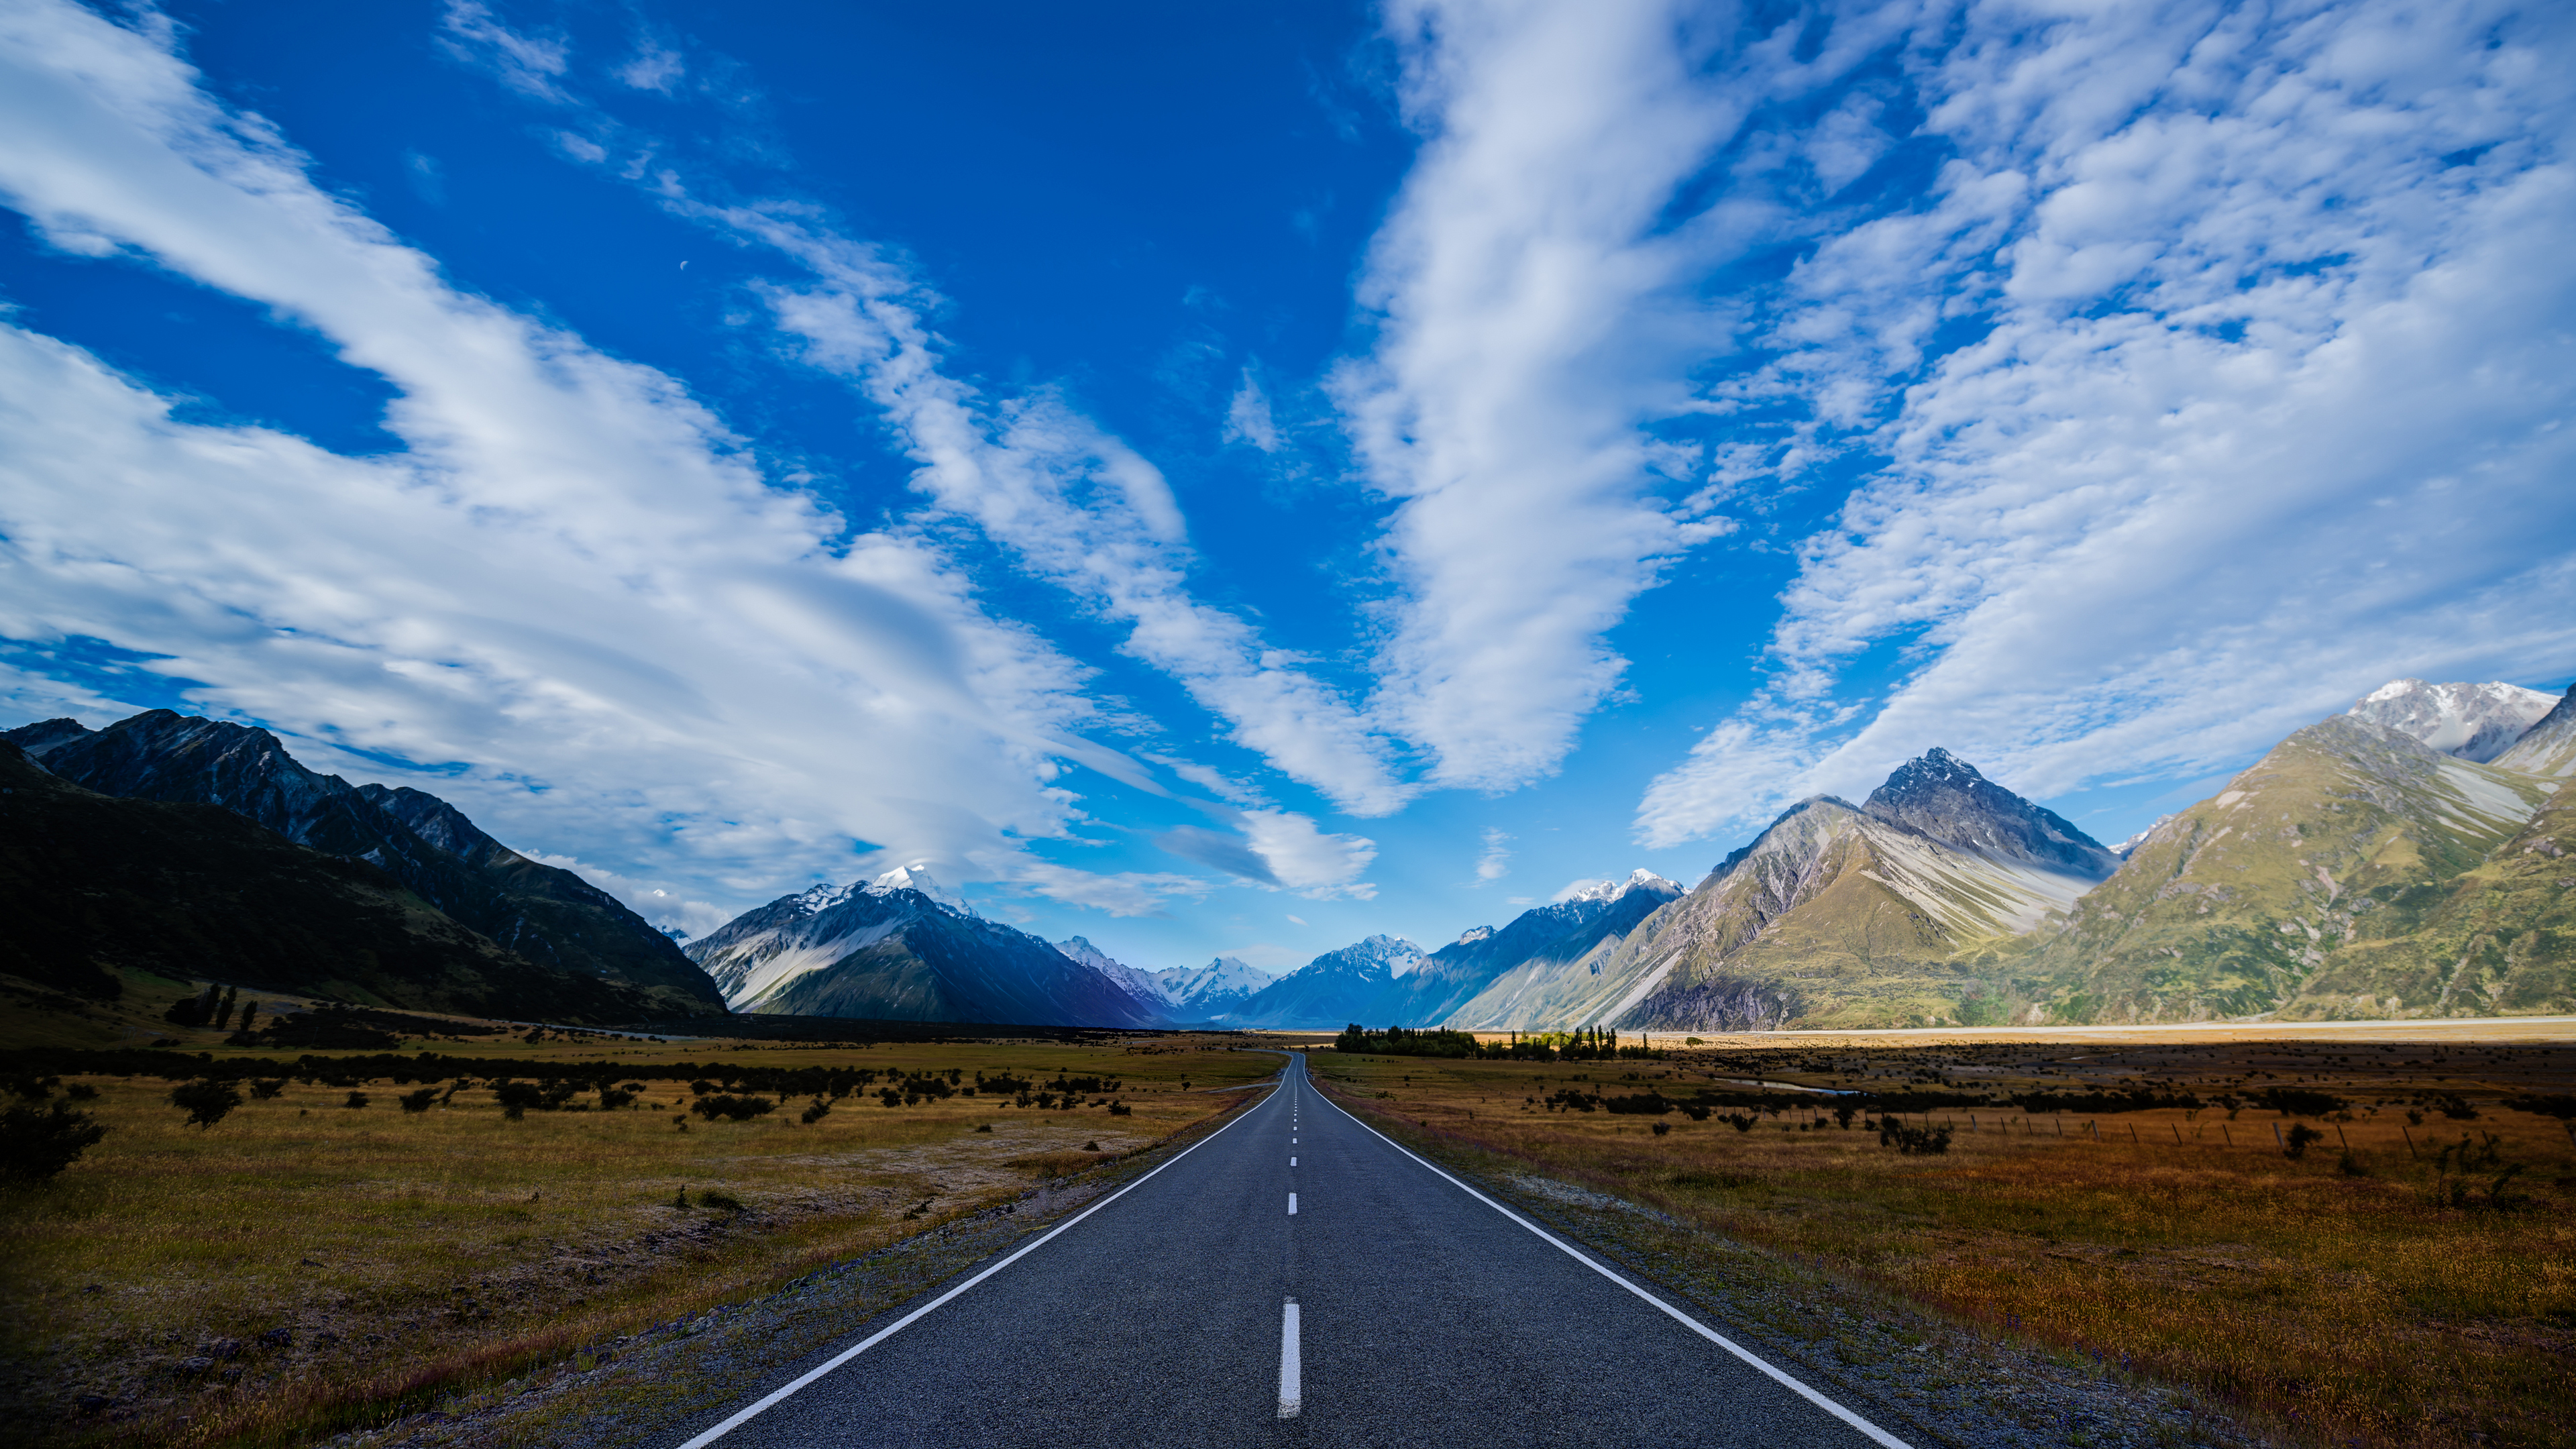 General 3840x2160 Trey Ratcliff photography landscape New Zealand nature sky clouds road mountains snow